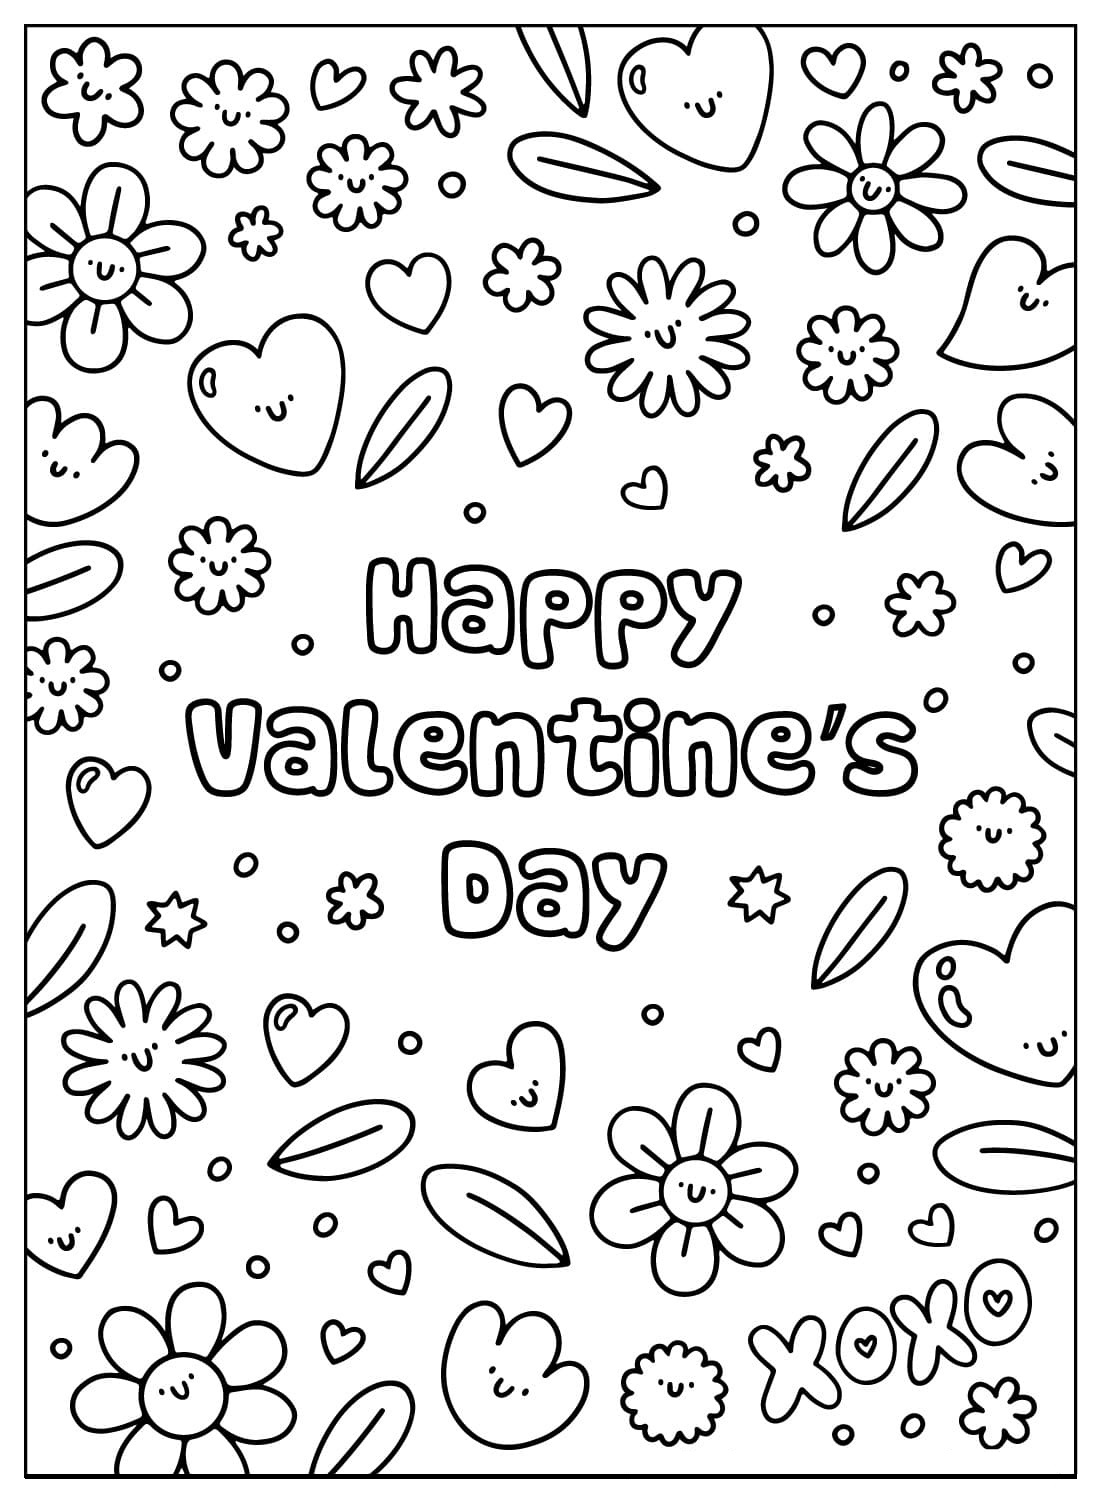 Valentines Day Cards Free Coloring Page